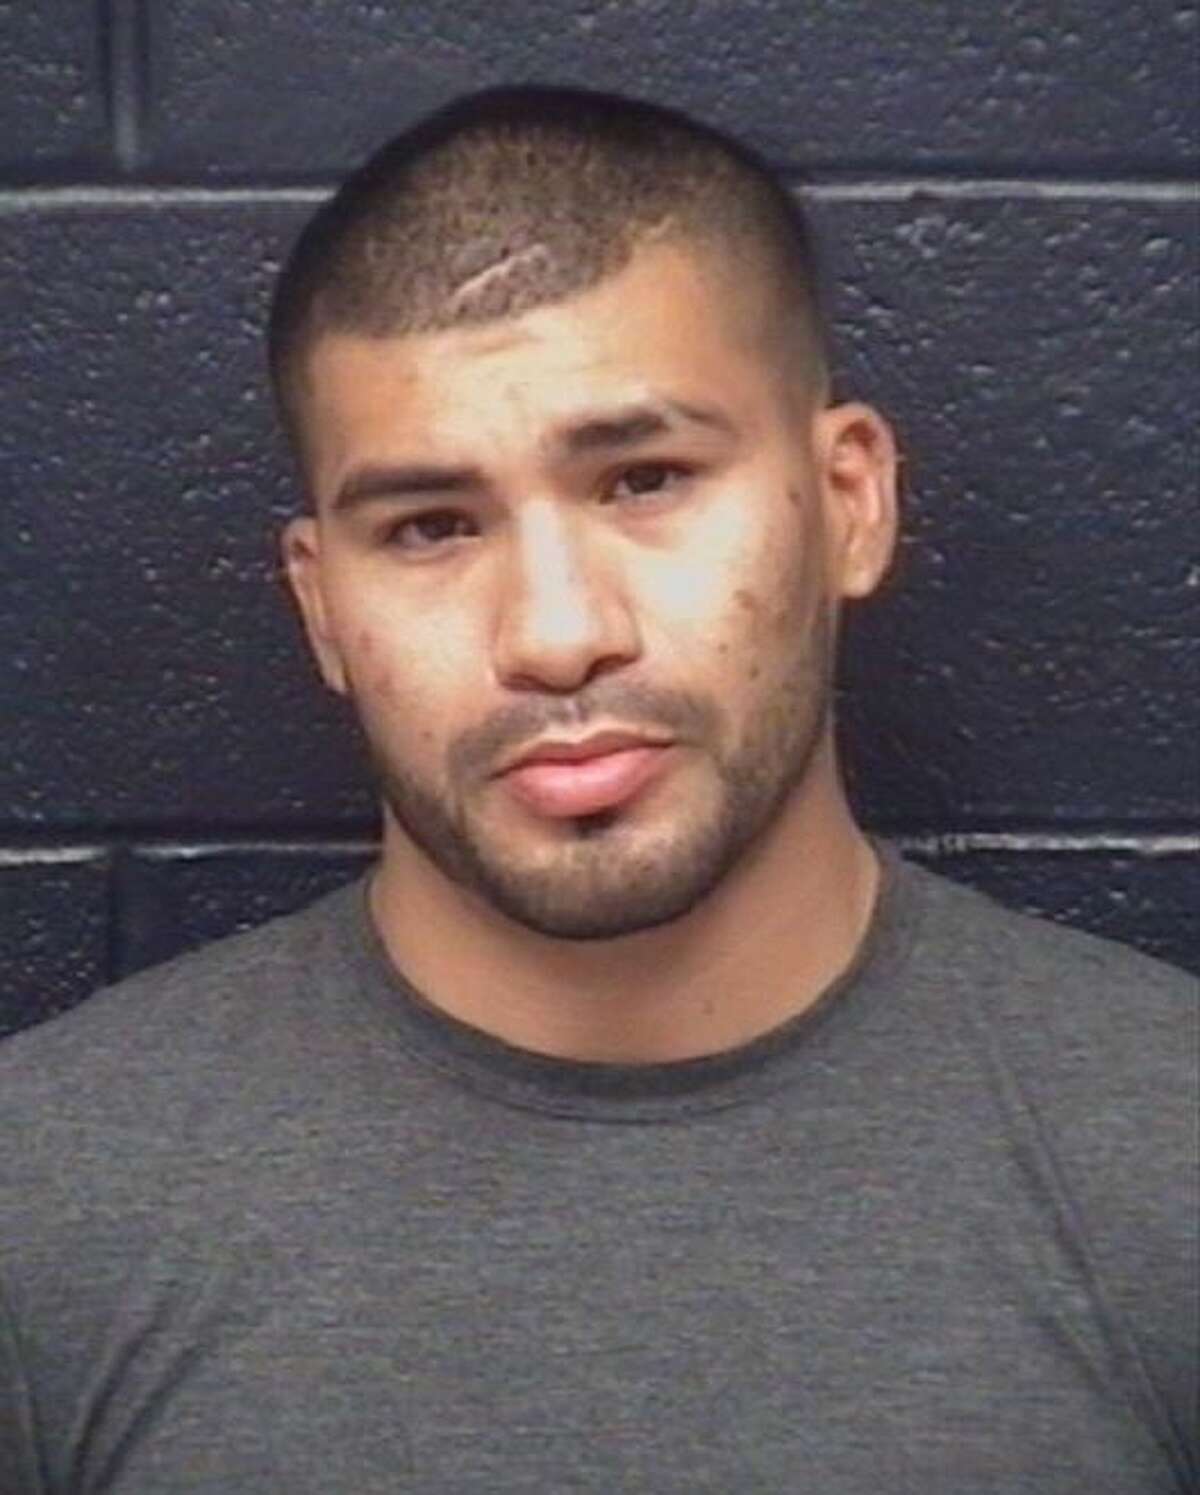 Eduardo Ramirez, 29, was served with a warrant charging him with publishing, threating to publish visual material in the 100 block of East Kearney Street.